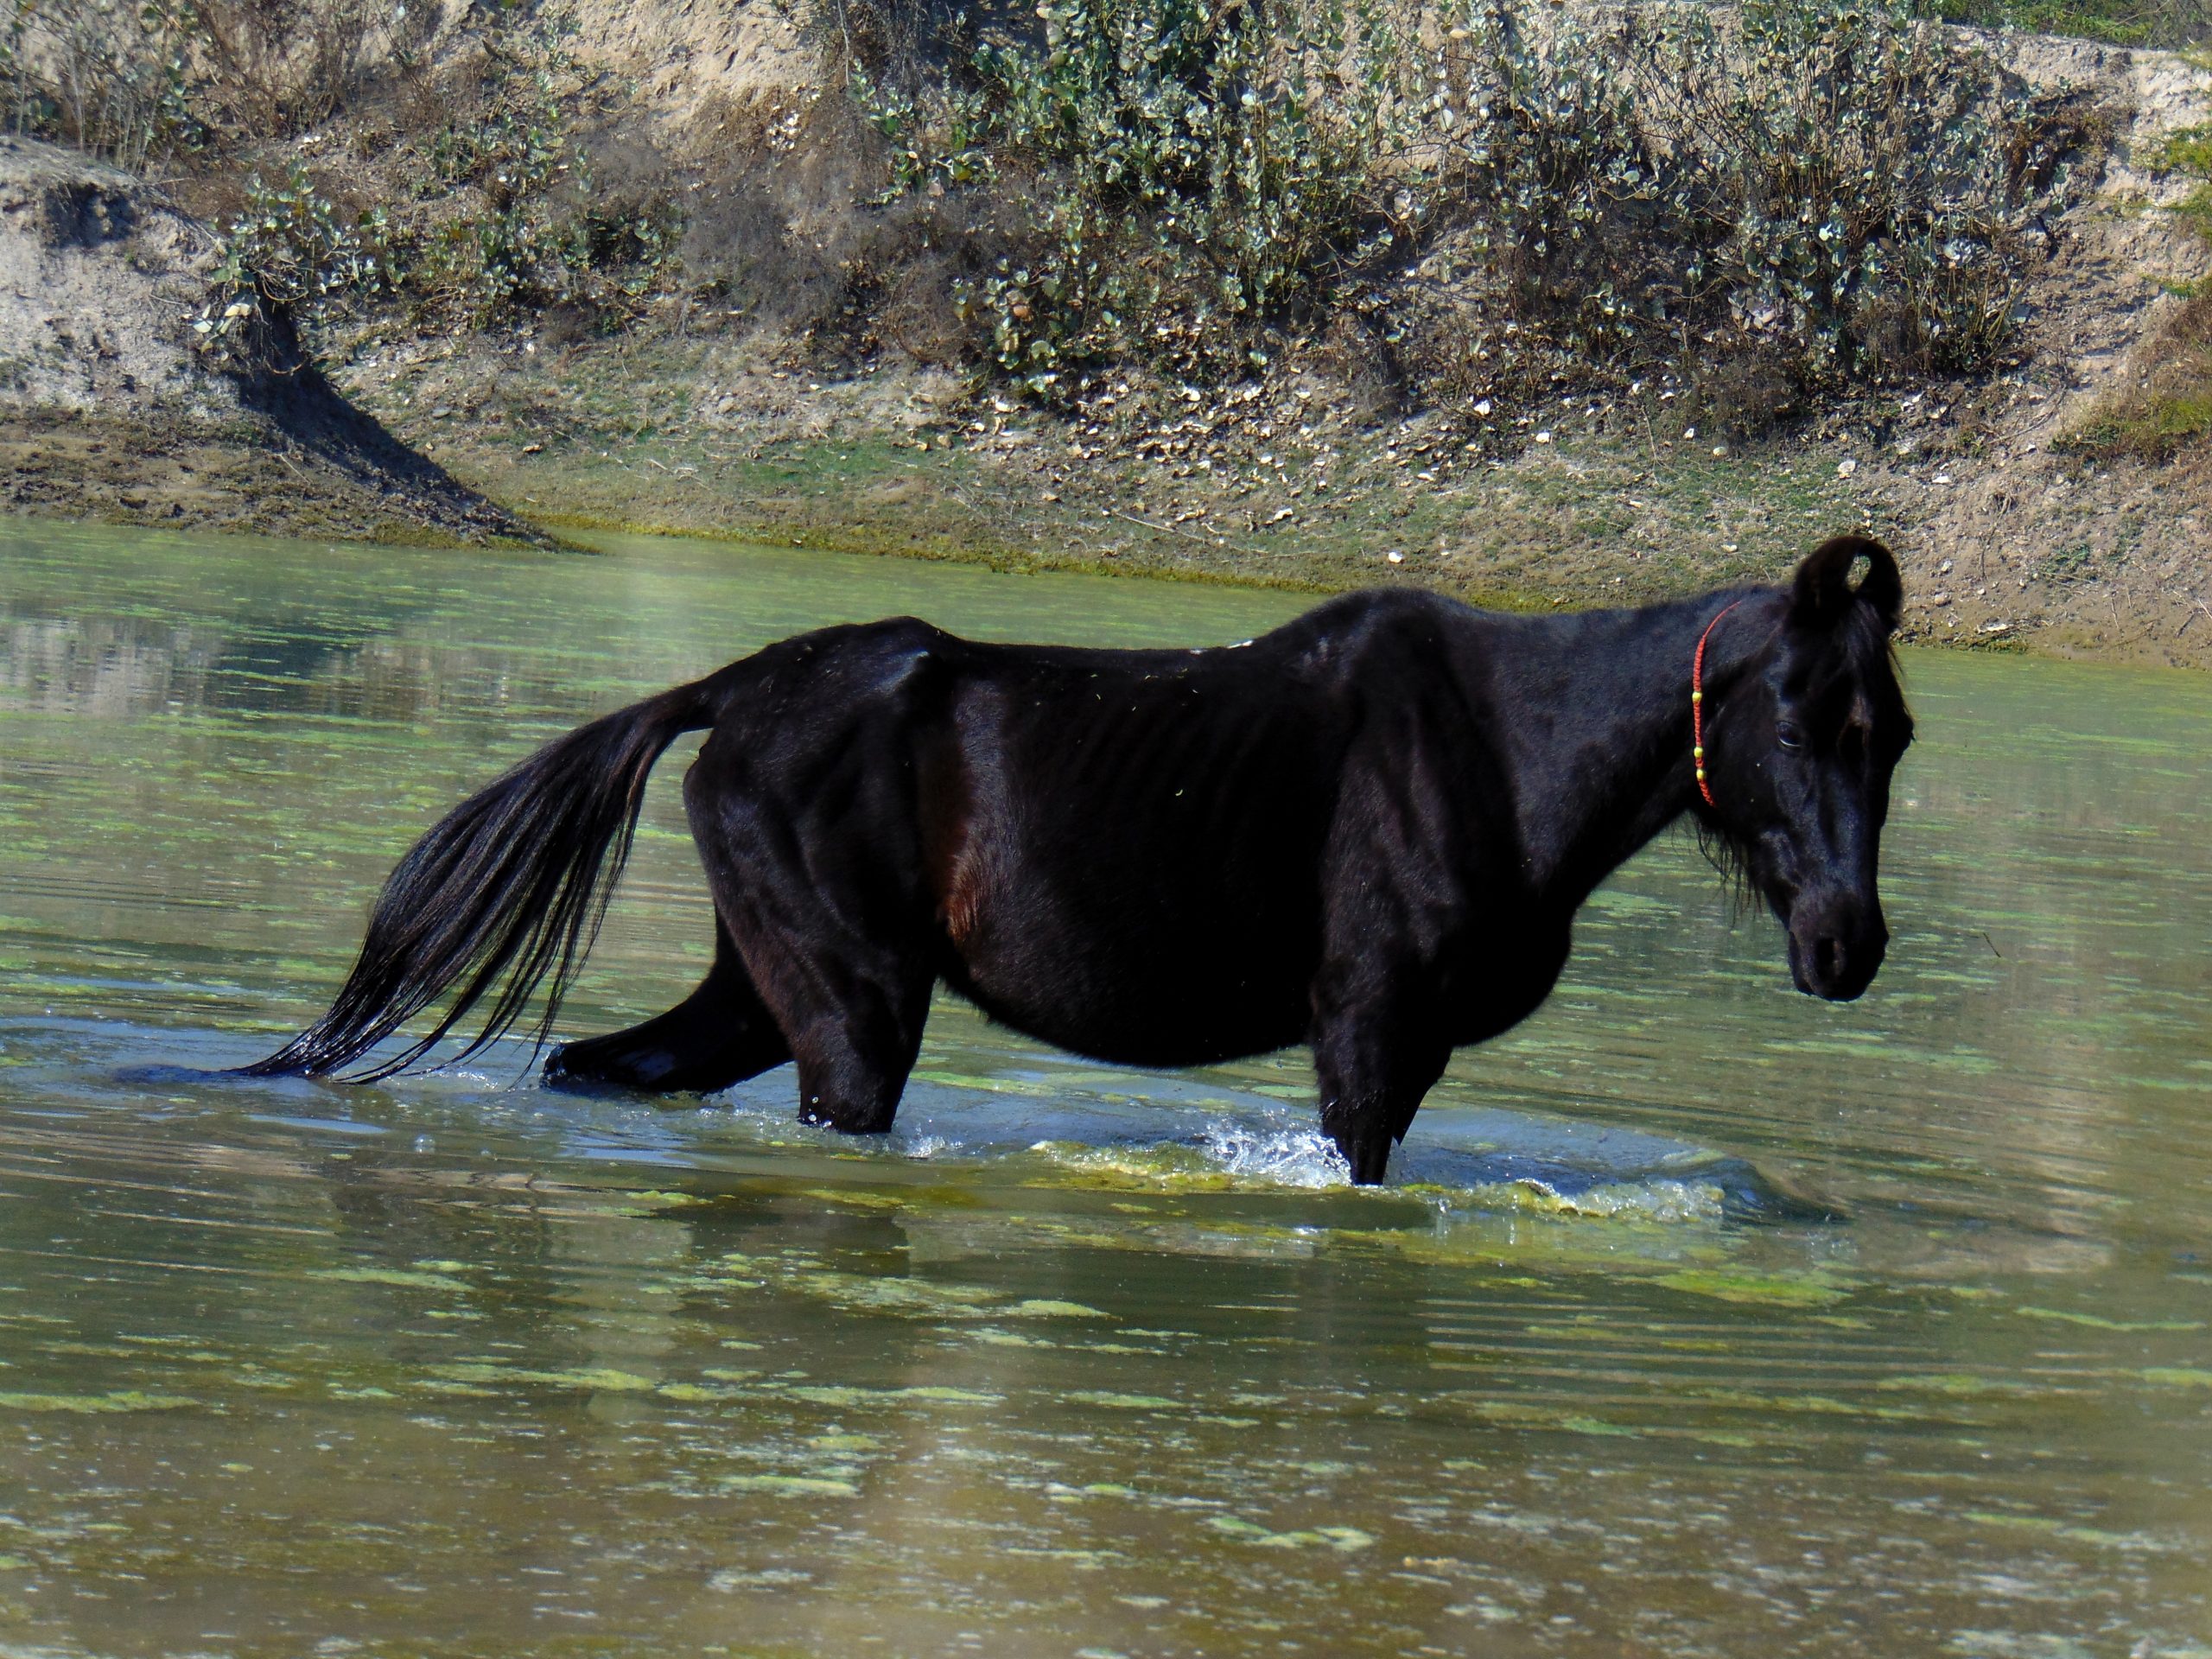 A black horse in water